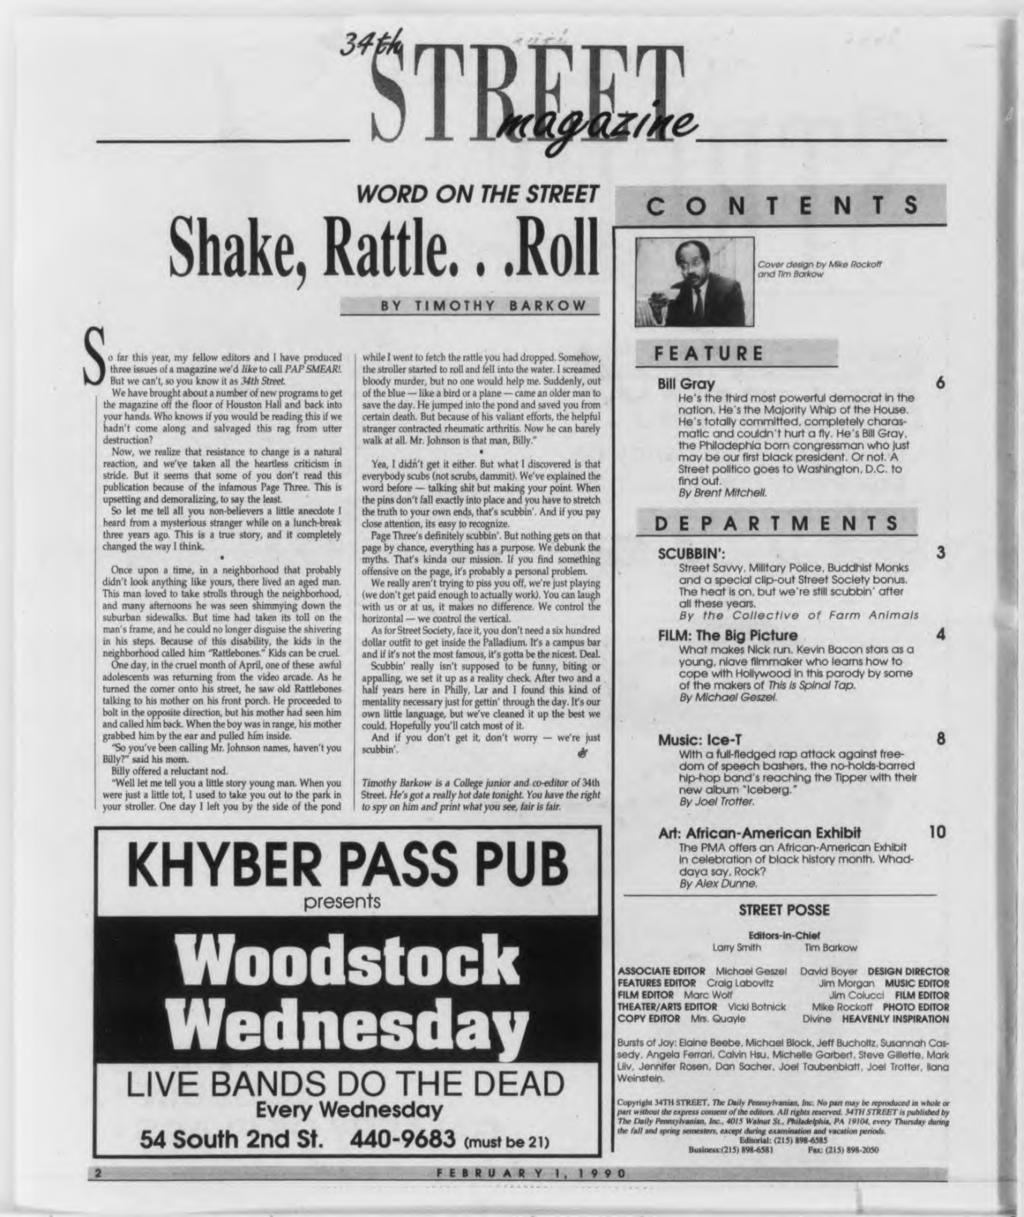 WORD ON THE STREET Shake. Rattle...Roll S o far this year, my fello editors and have produced three issues of a magazine e'd like to call PAP SMEAR!. But e can't, so you kno it as 4th Sheet.